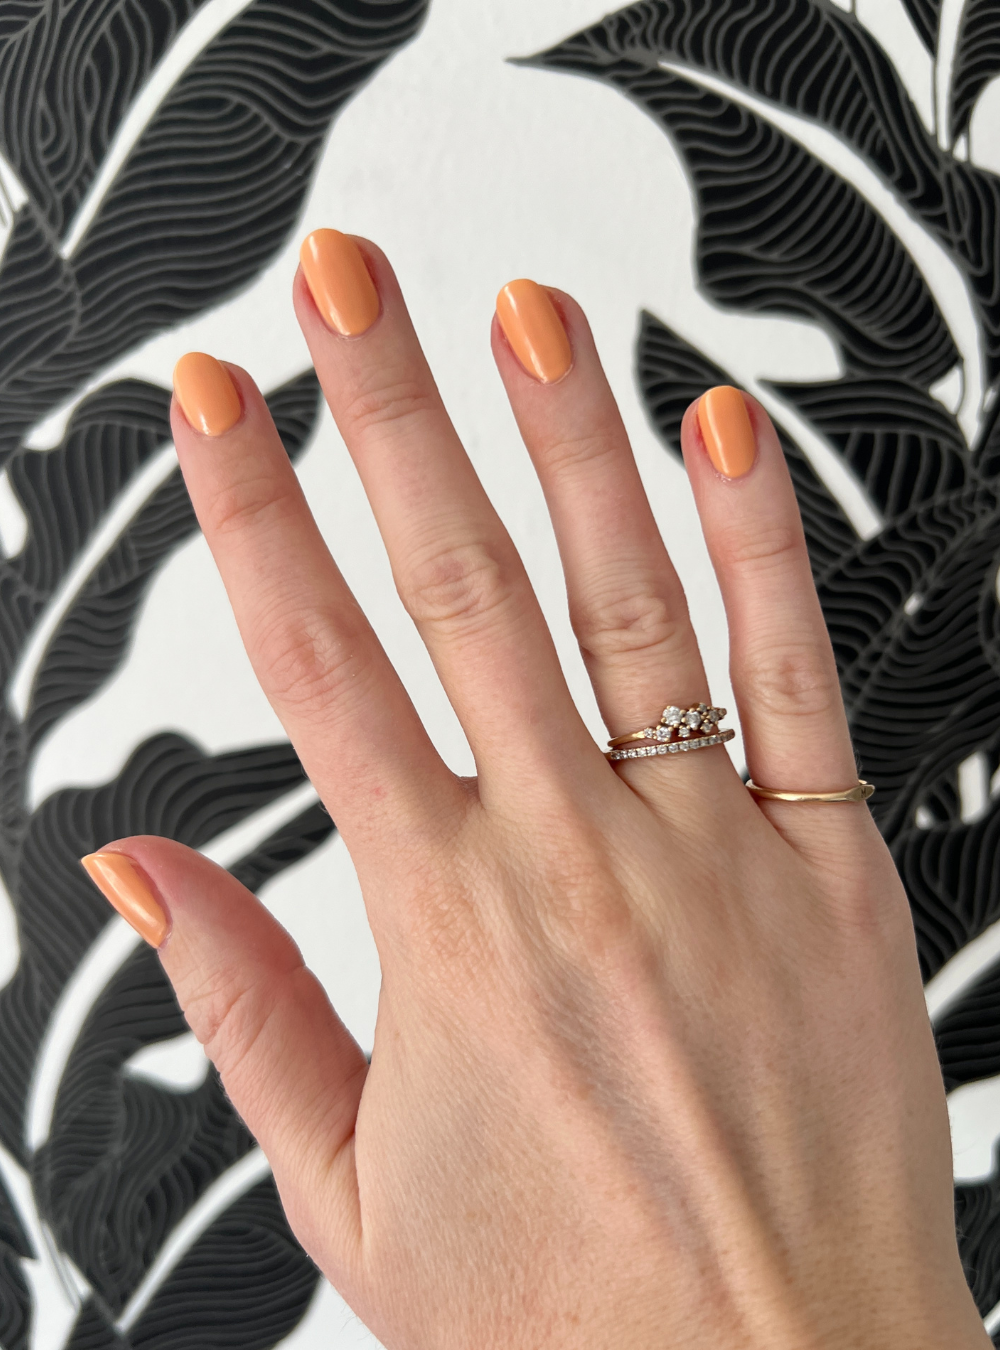 A close up of hand painted with orange nail polish.